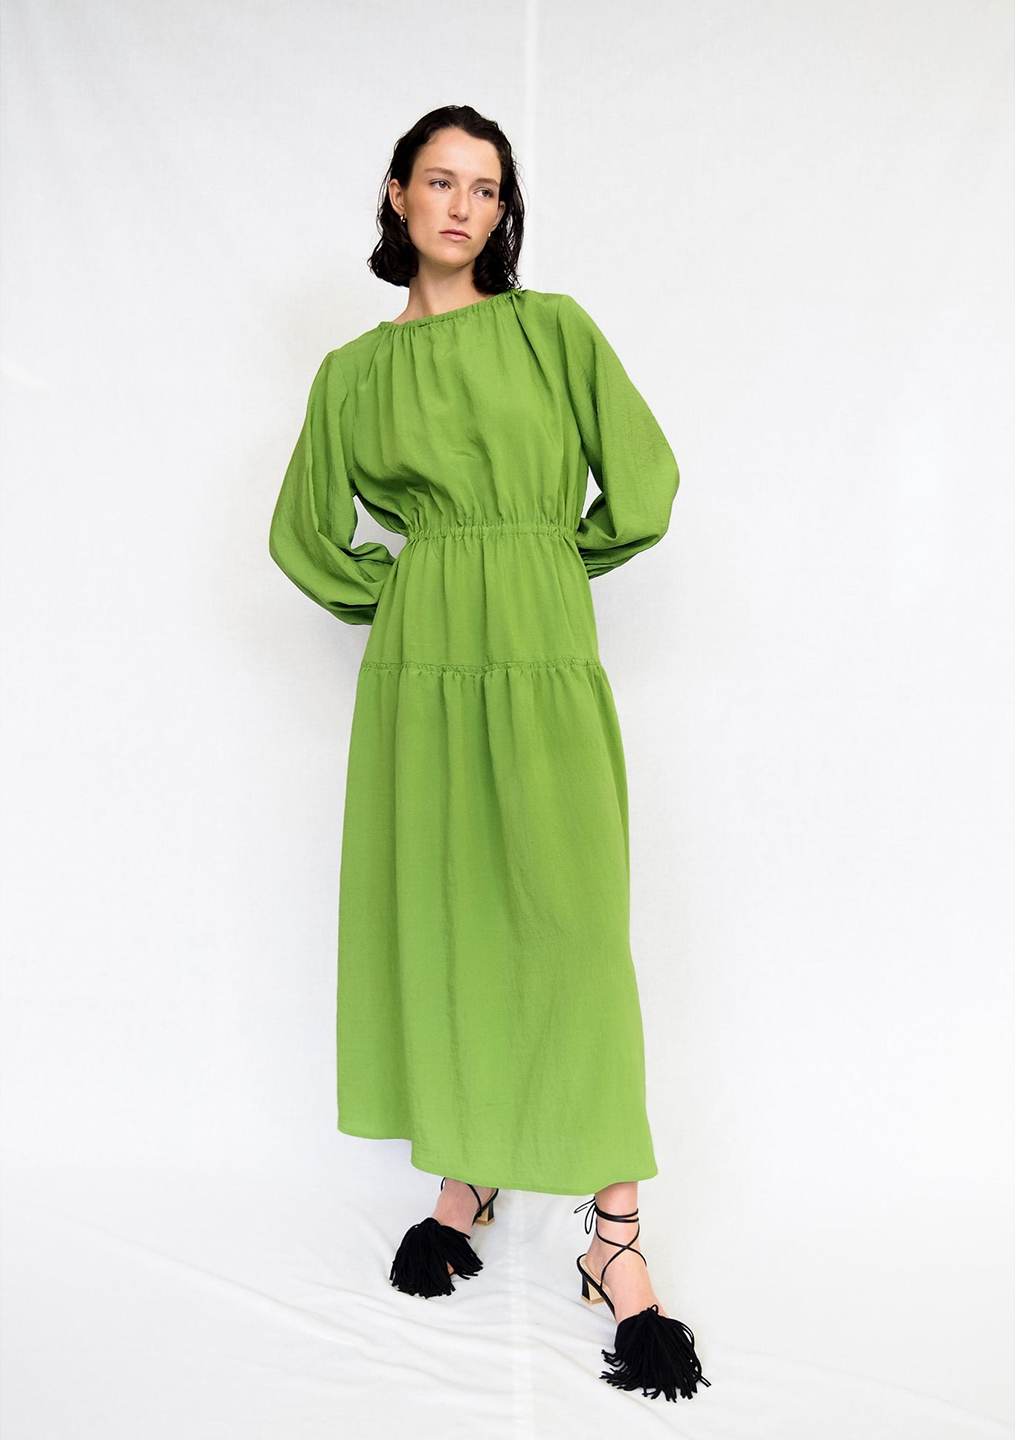 Gregory | Ash Dress - Green - Contain Boutique